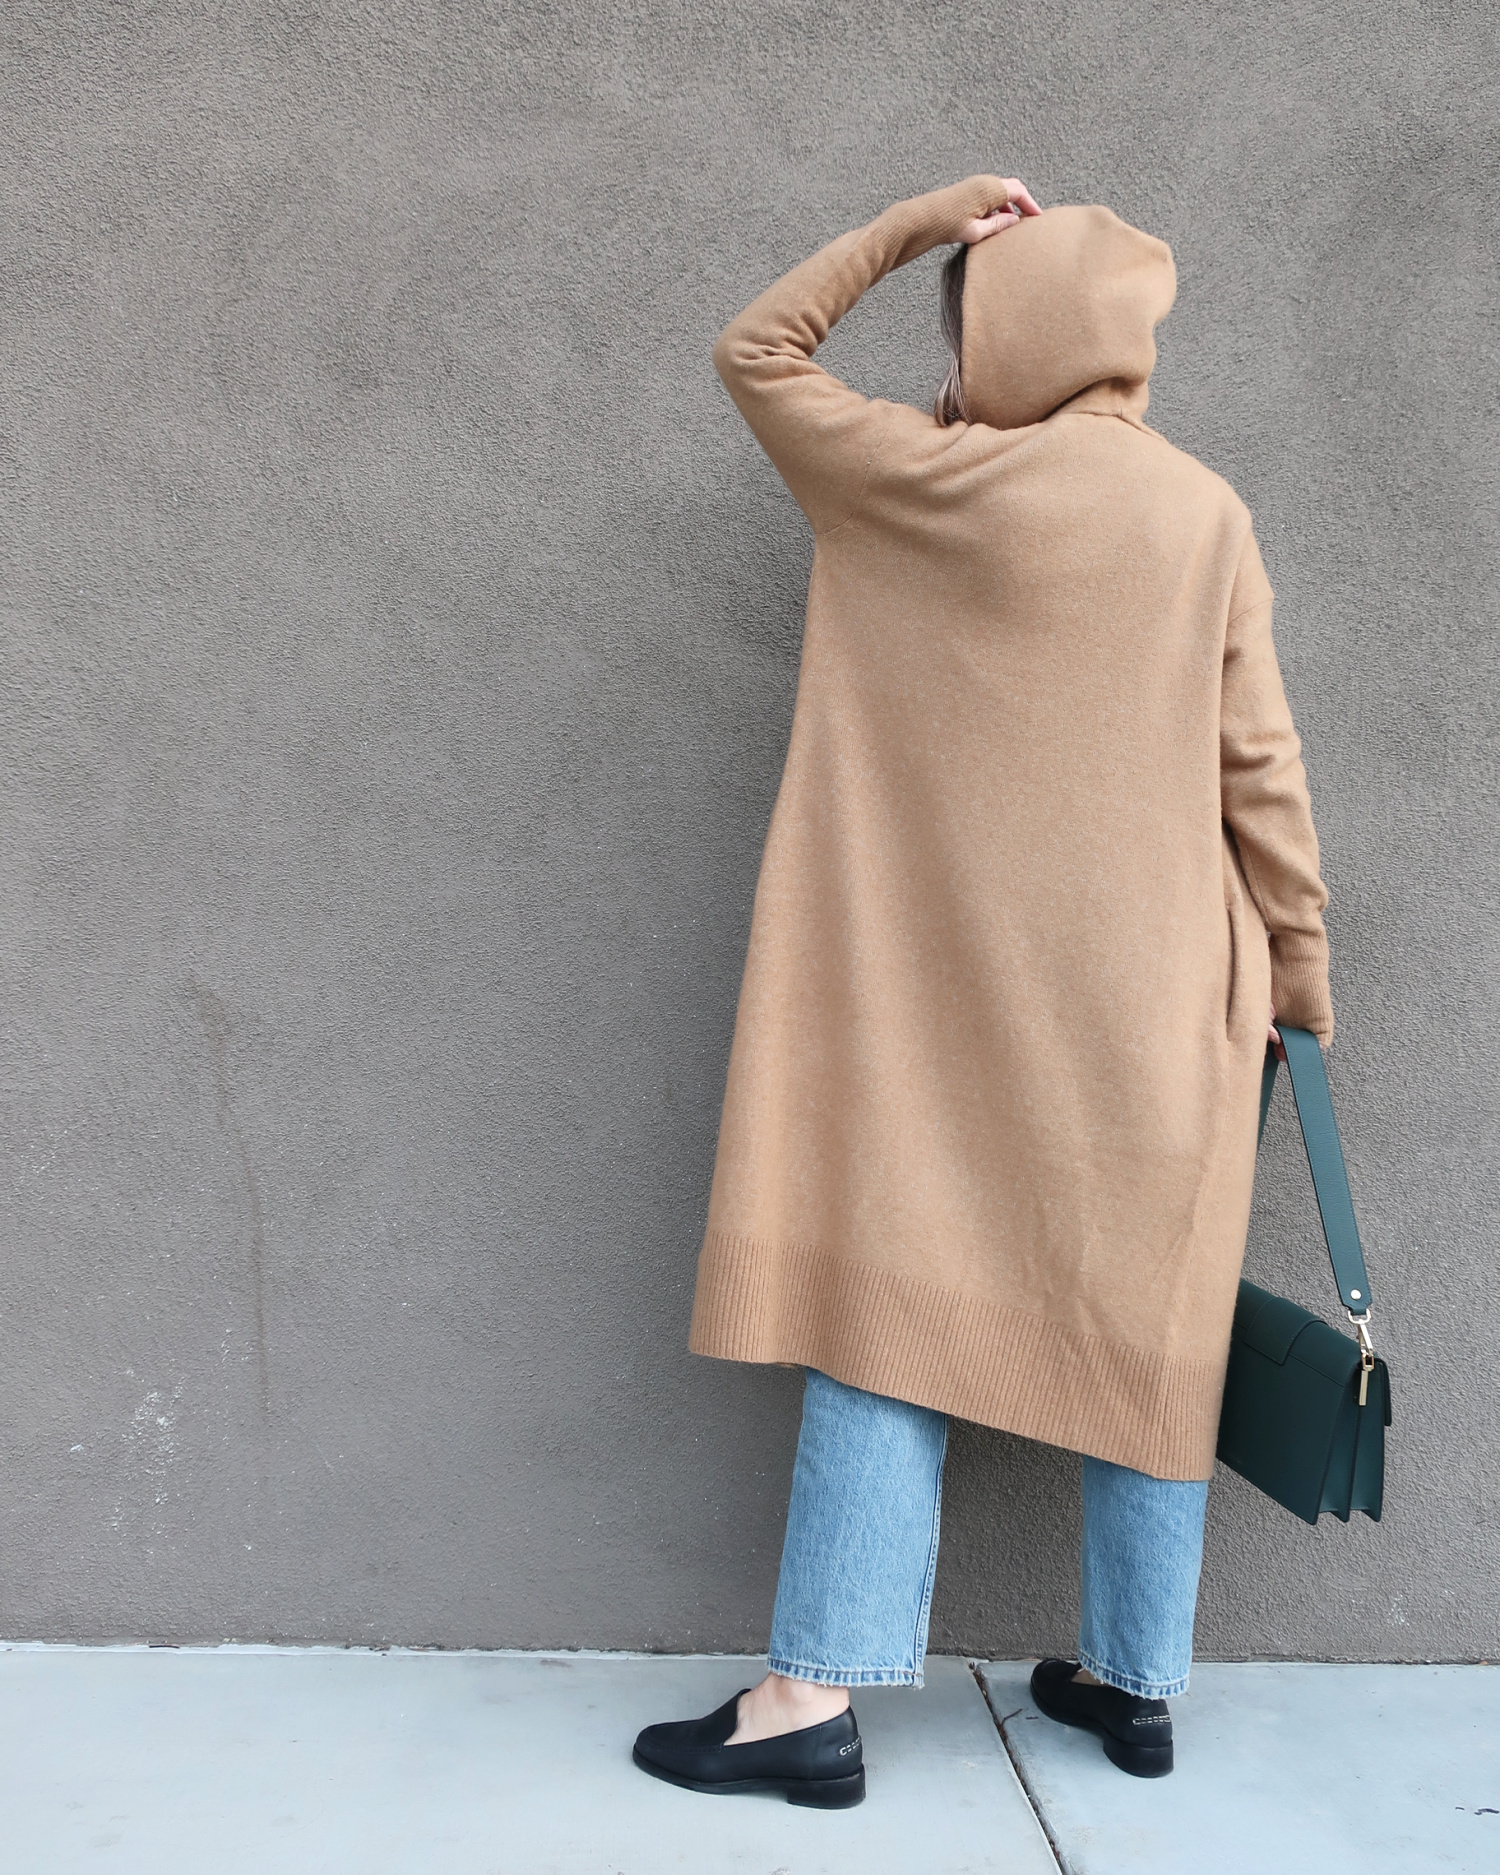 Everlane's Cozy Stretch Duster Review